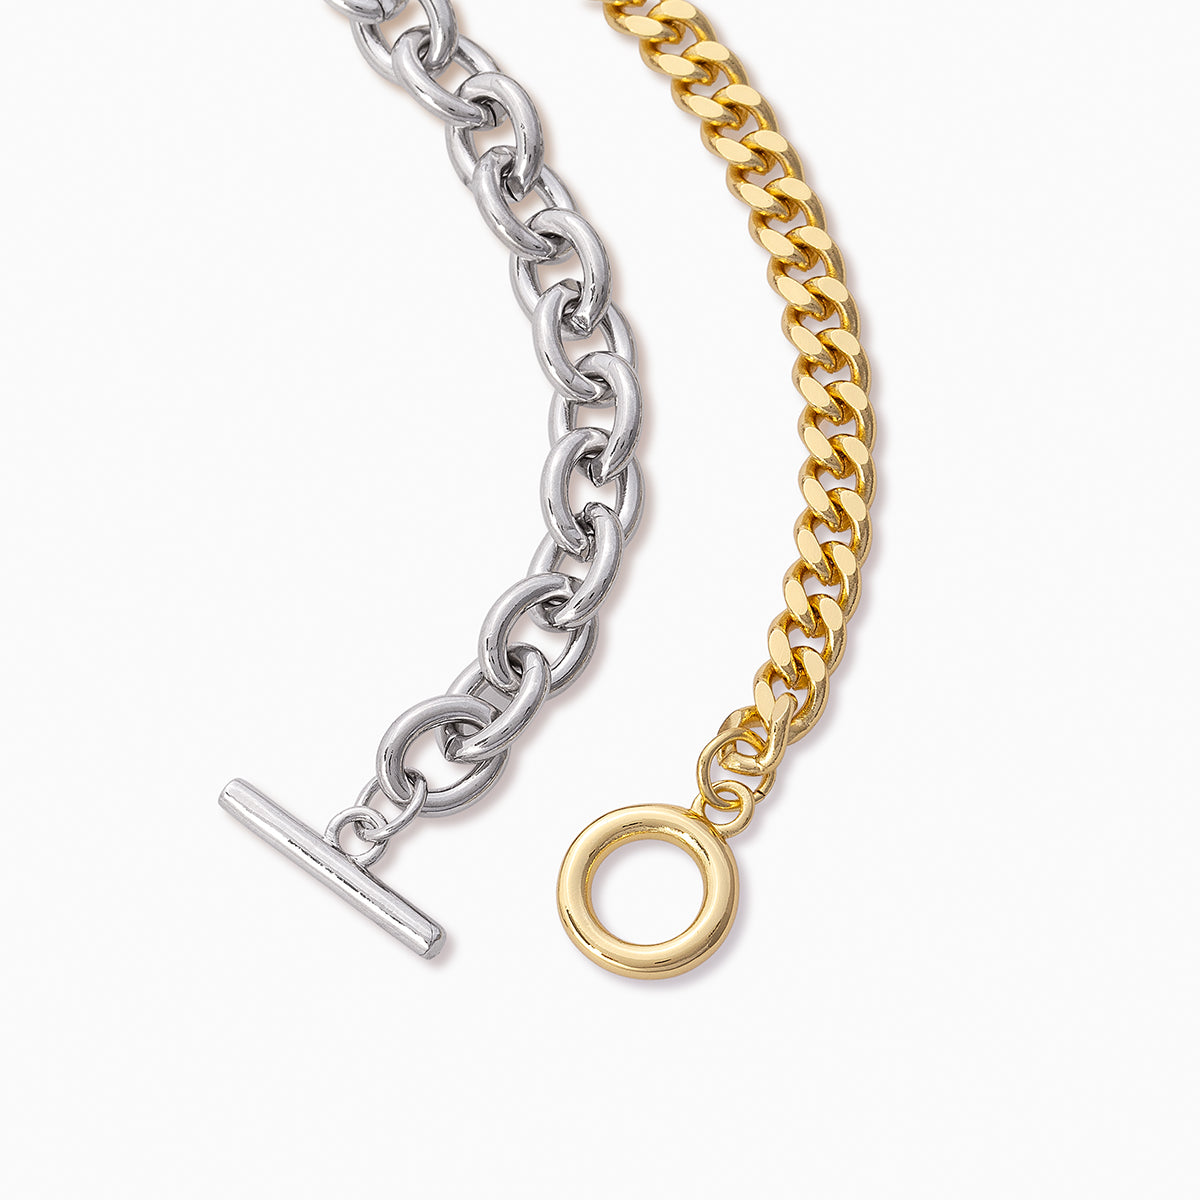 Mixed Up Bracelet | Mixed Metal | Product Detail Image | Uncommon James